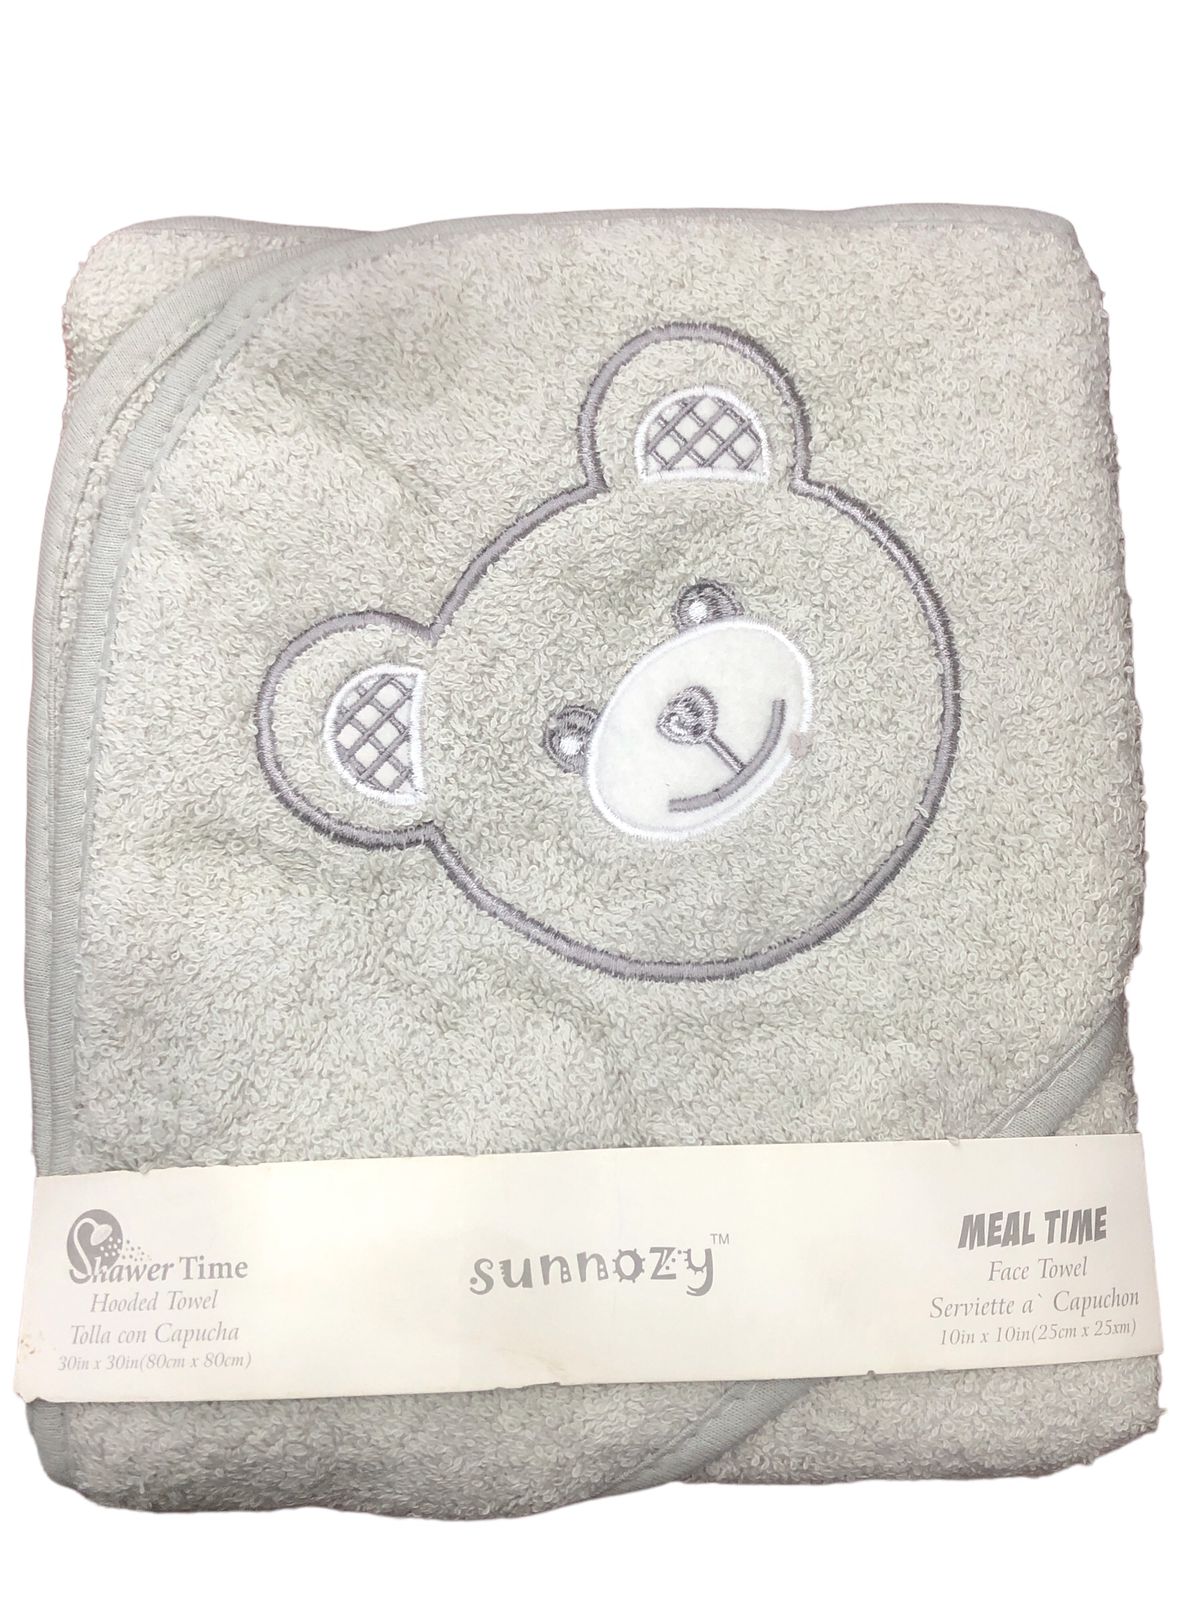 Baby hooded towel / shawer time